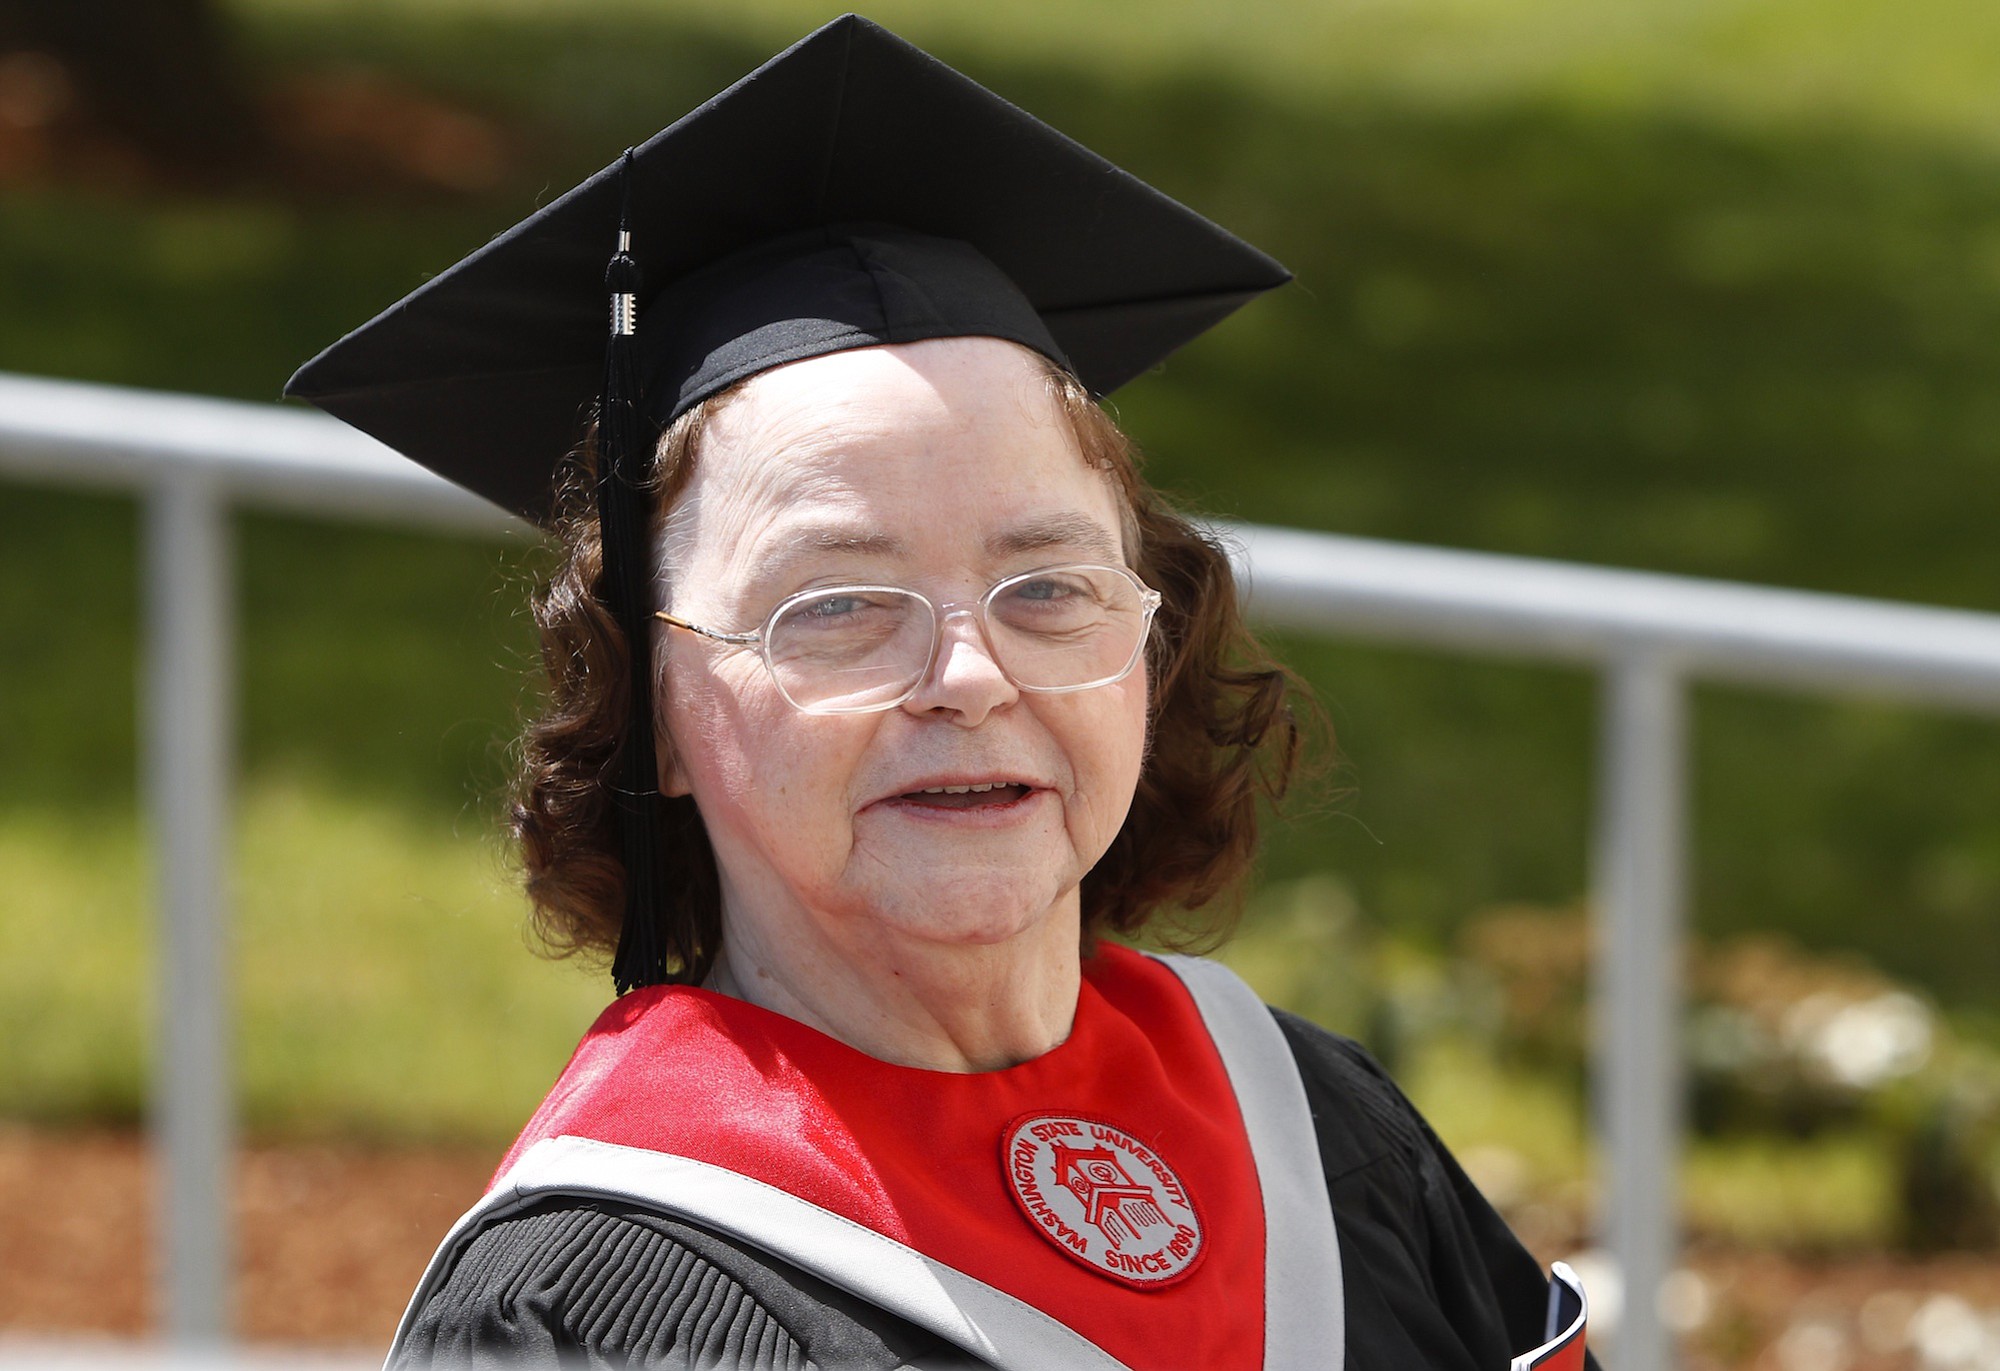 Vancouver resident Sharon Culver, 70, earned a bachelor's degree in human development from Washington State University Vancouver.